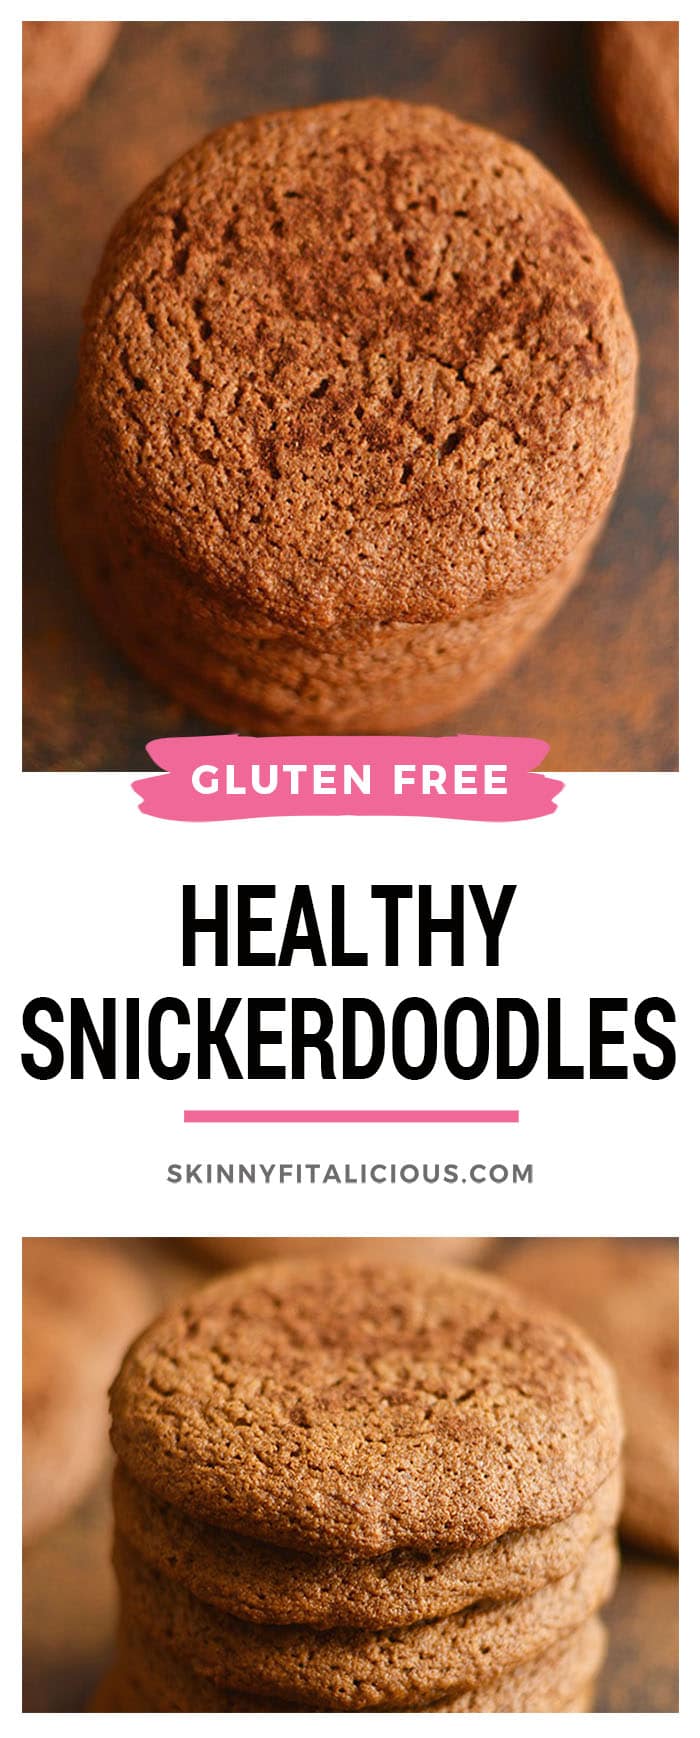 These Healthy Snickerdoodles are a classic cookie with a healthy makeover. Made with oat flour with no refined oil or sugar, these healthier cookies take 10 minutes to make & are guaranteed to blow your baking socks off! Gluten Free + Low Calorie